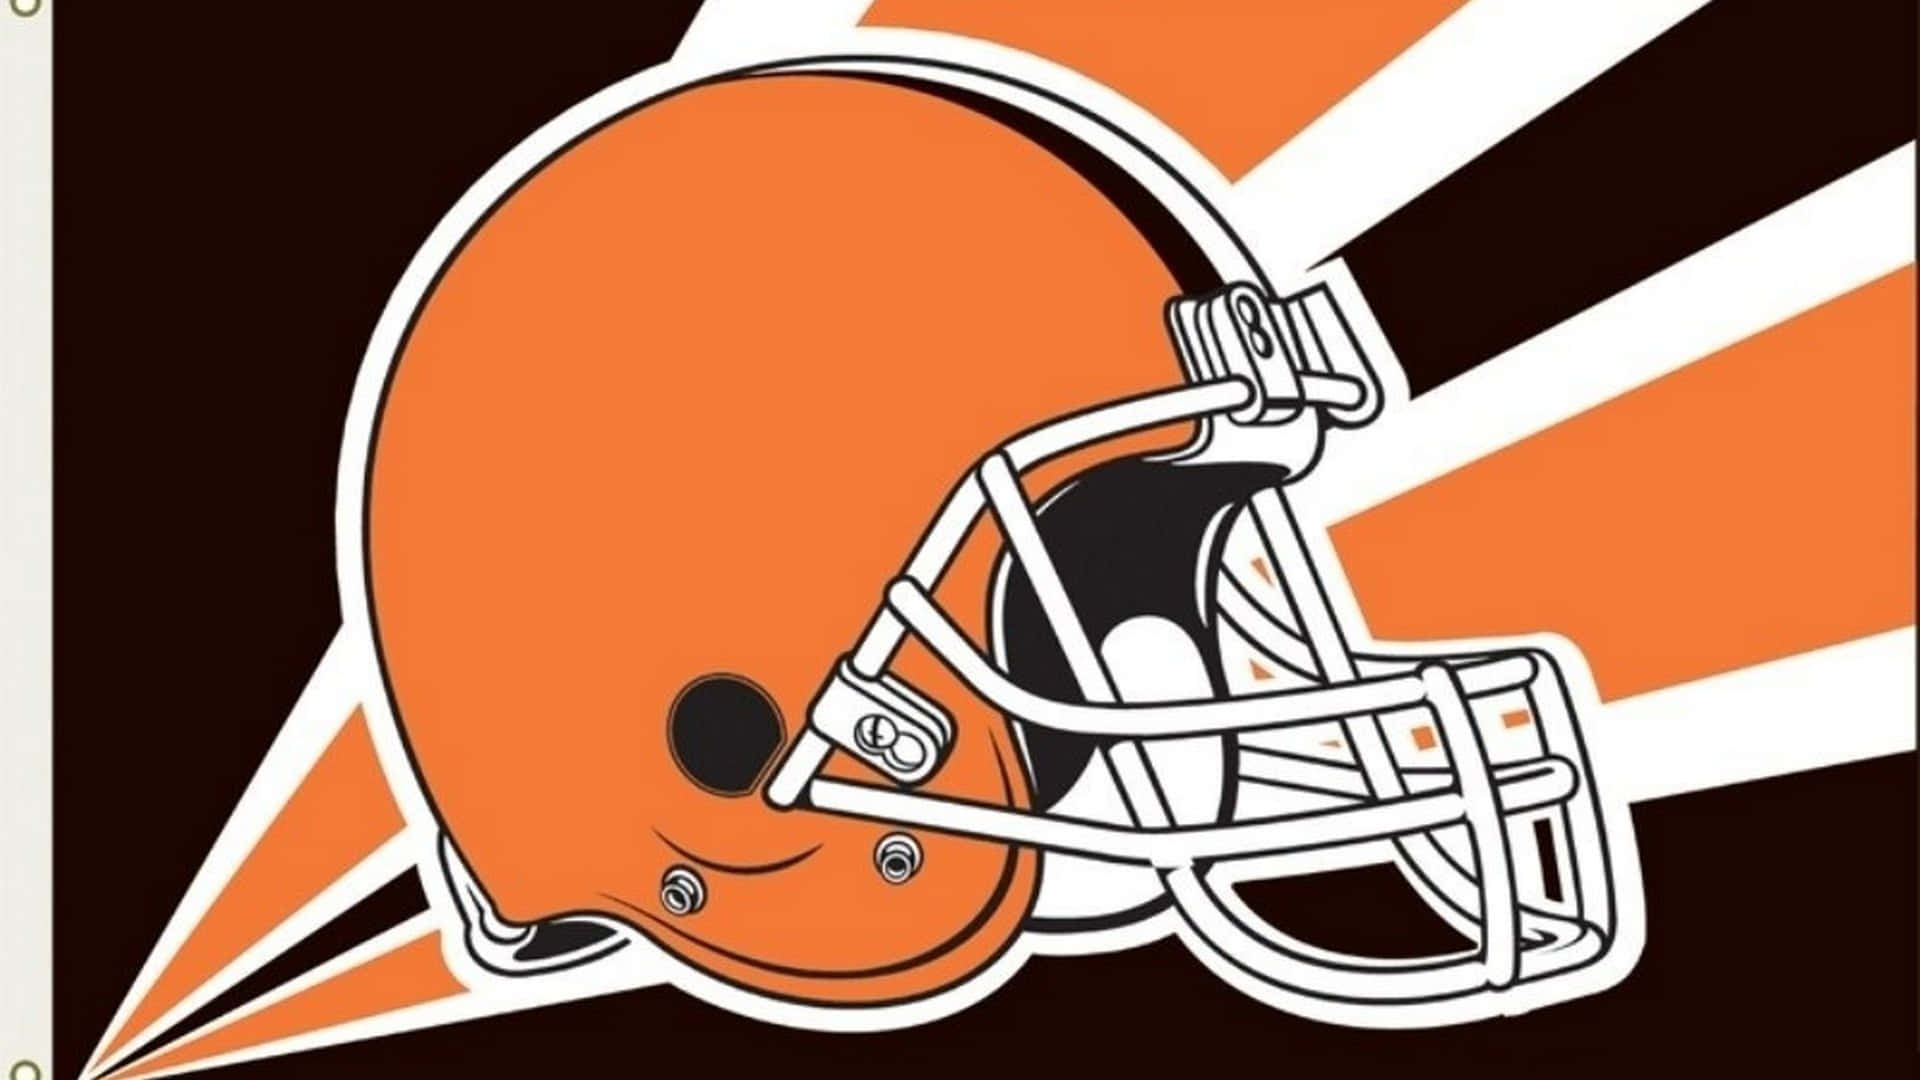 The iconic Cleveland Browns logo Wallpaper